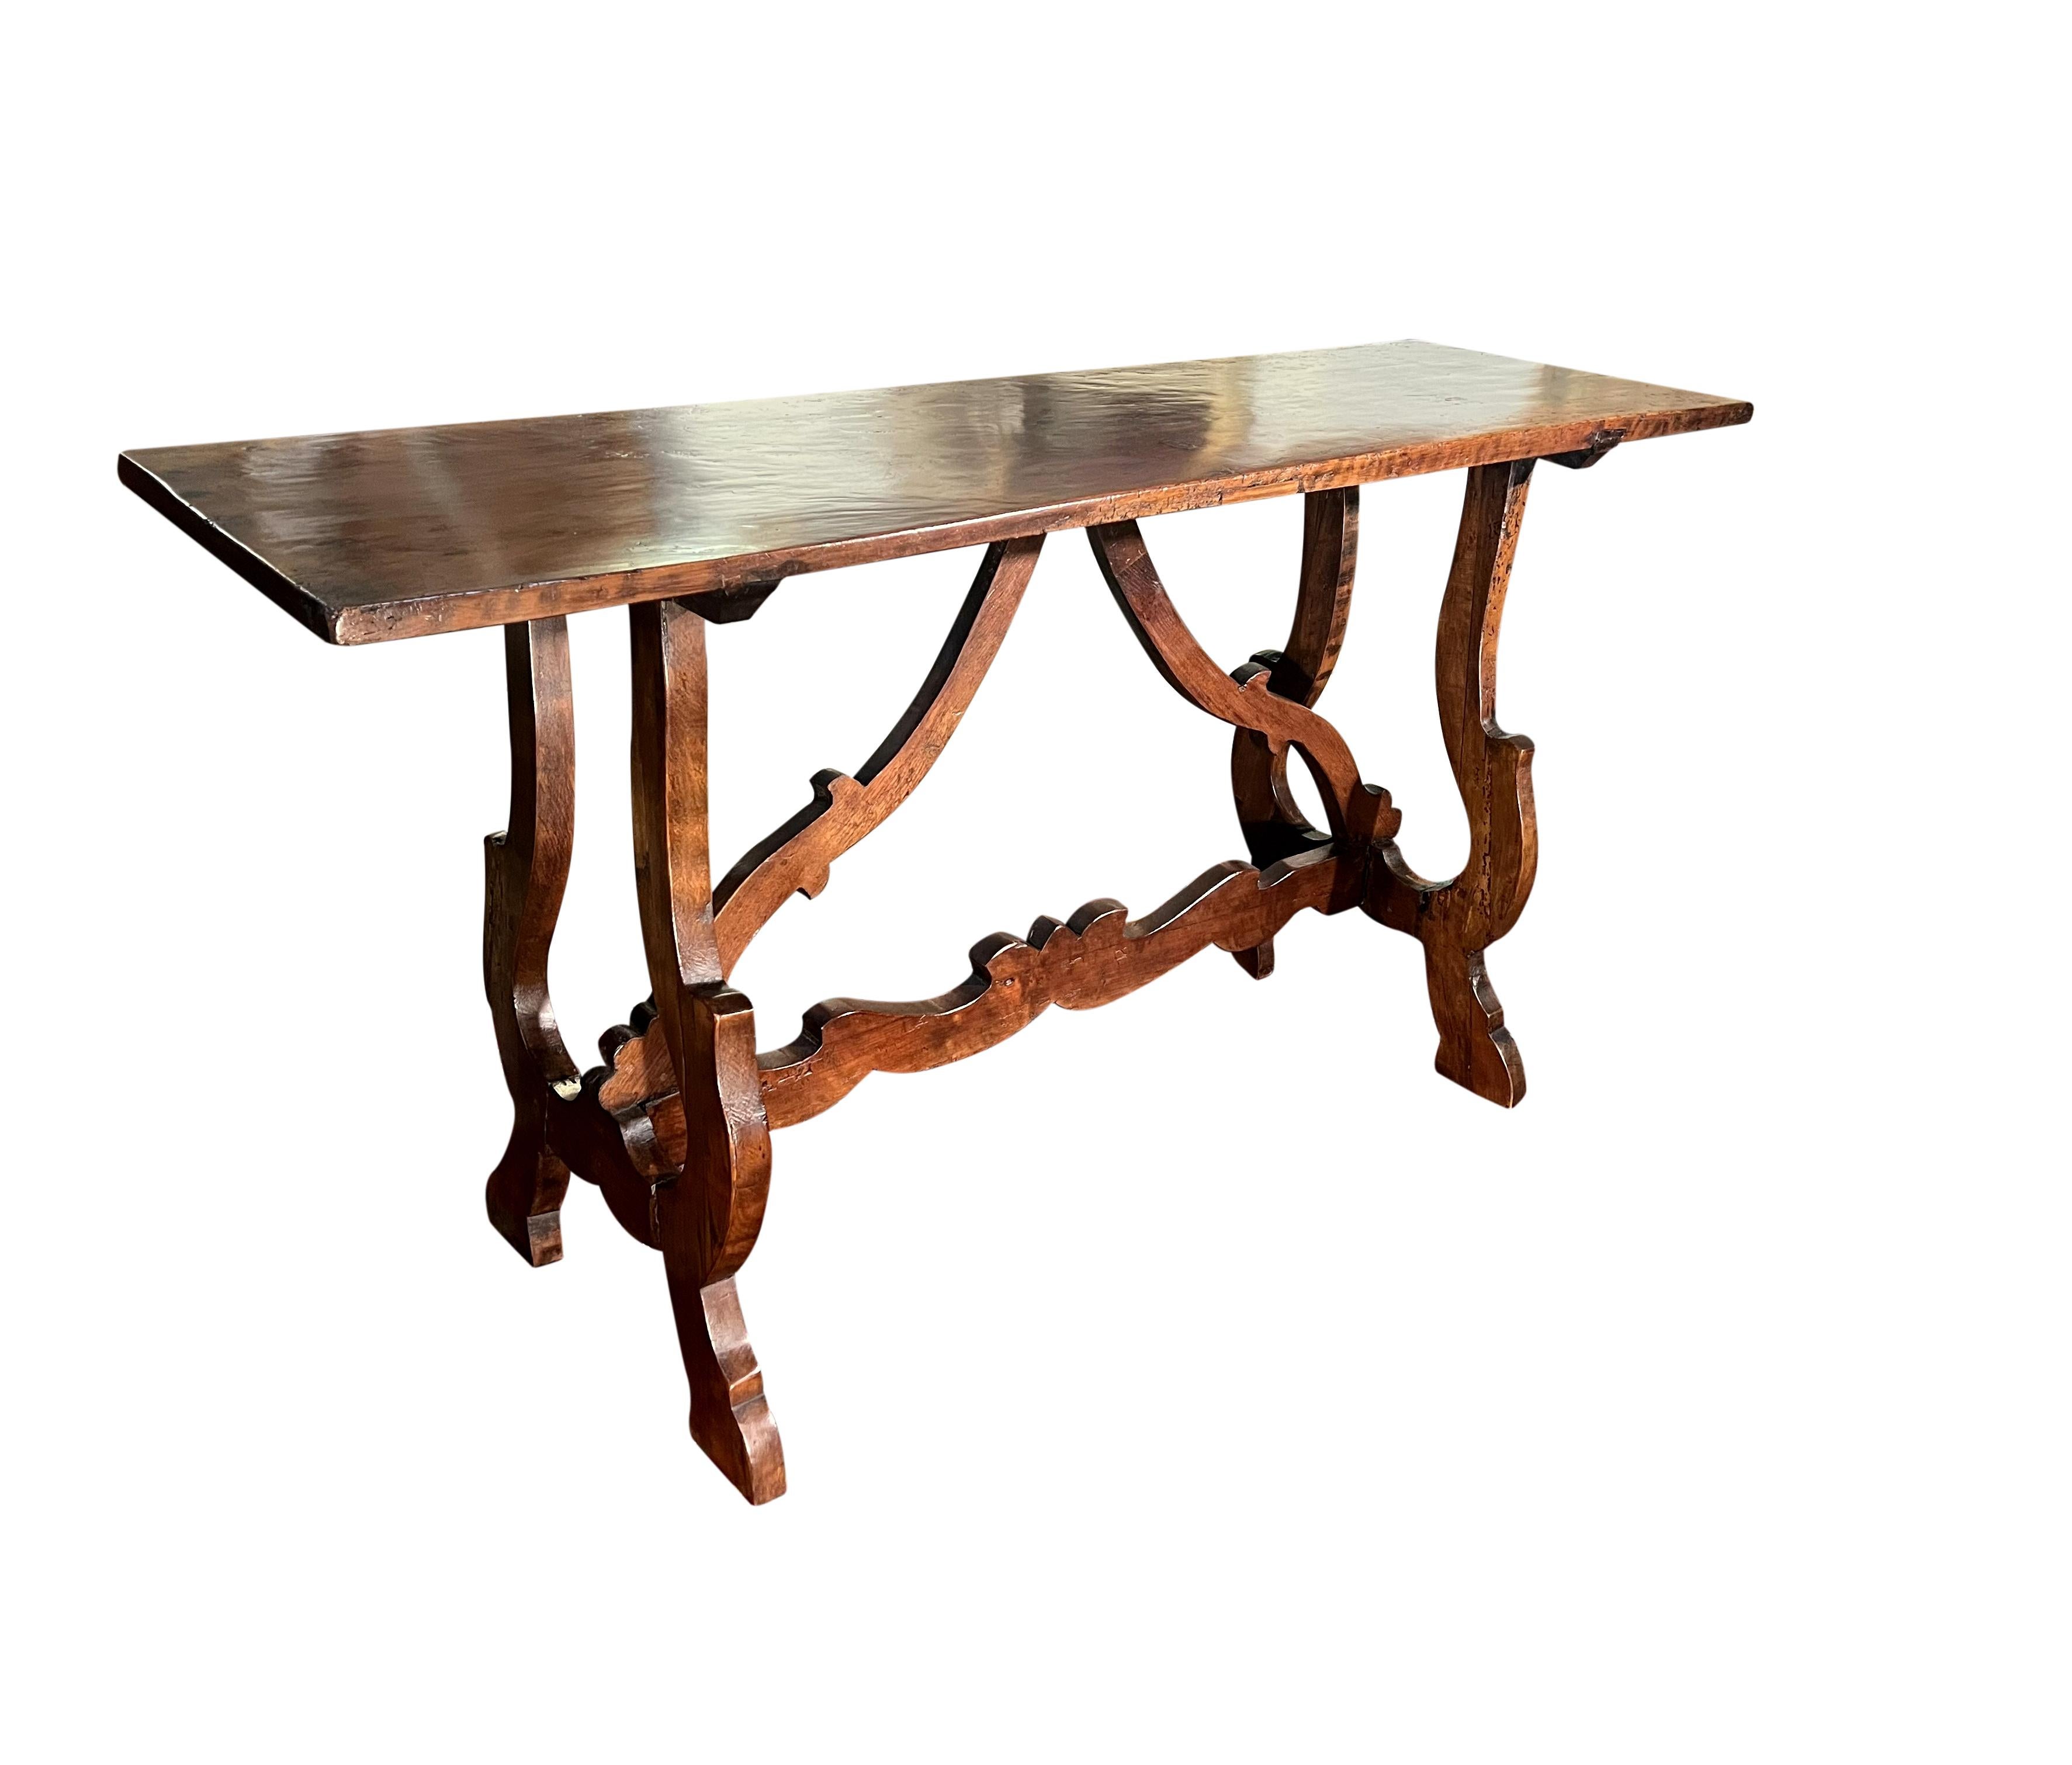  Italian 18th Century Tuscan Fratino Table with Lyre legs. In Good Condition For Sale In Encinitas, CA